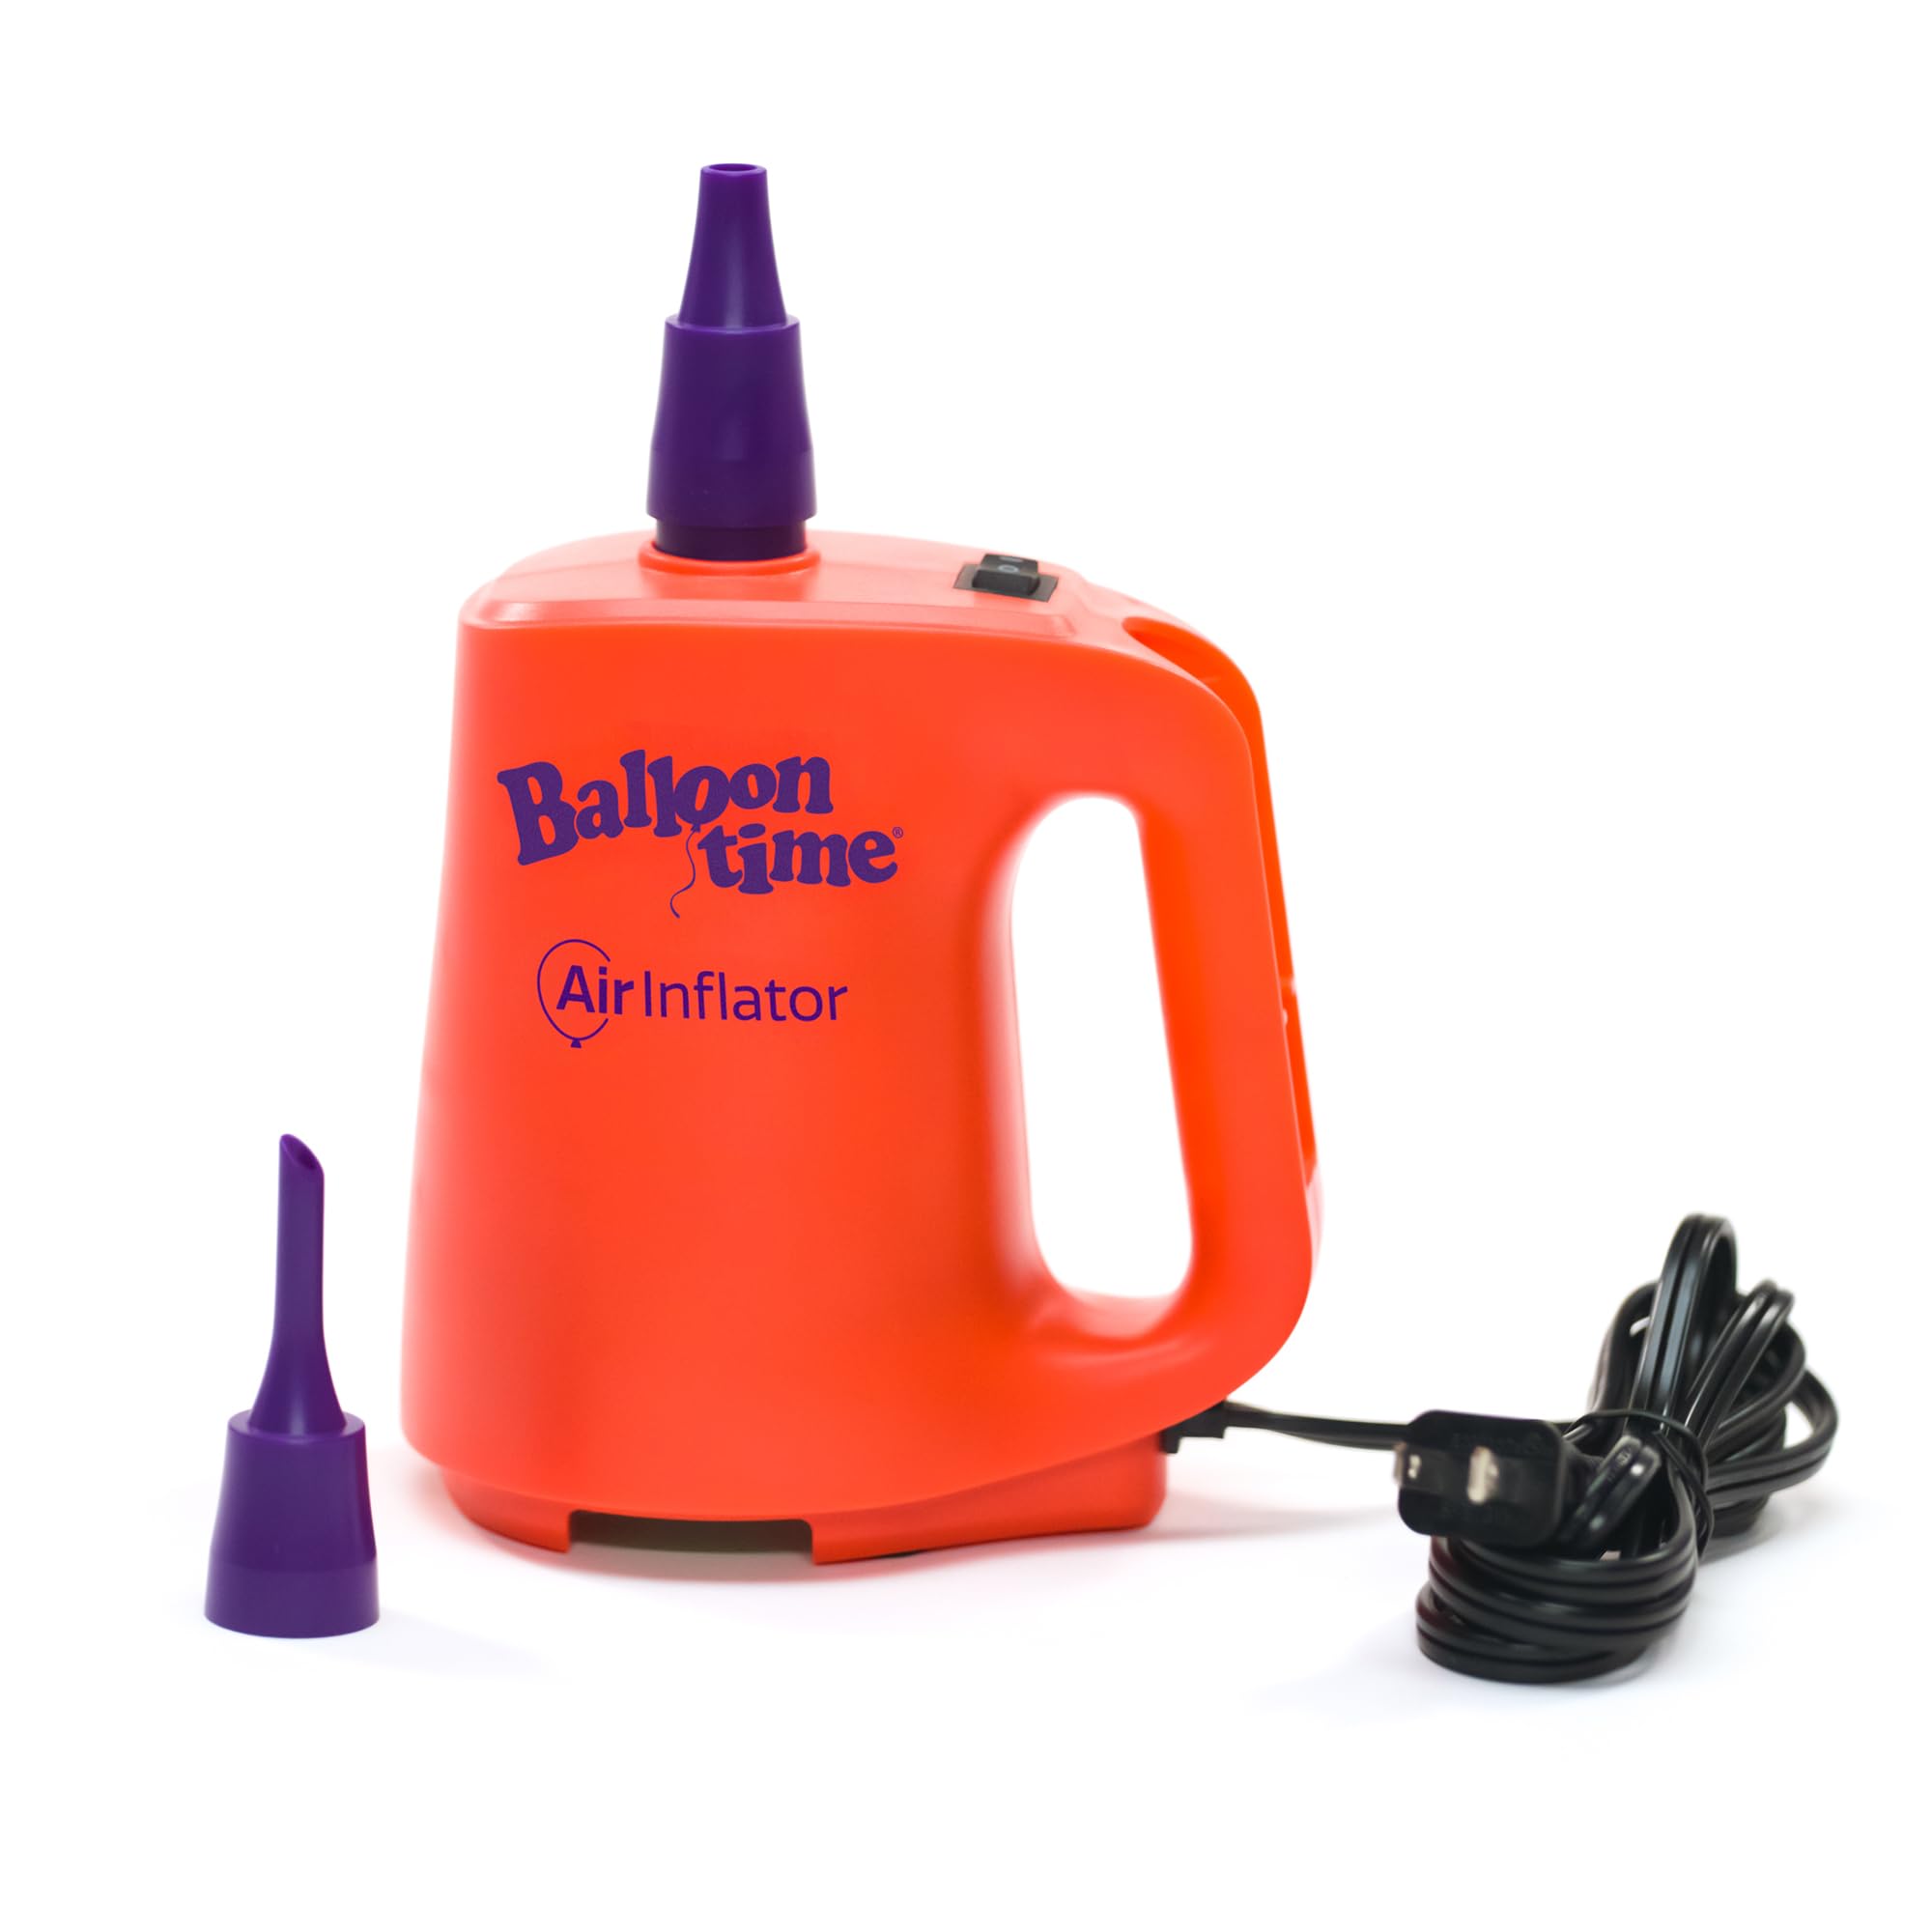 Balloon Time Electric Air Inflator and Deflator - Powerful Portable Electric Air Pump for Balloons, Balloon Arch, Party Decorations, Inflatables, and Air Mattresses